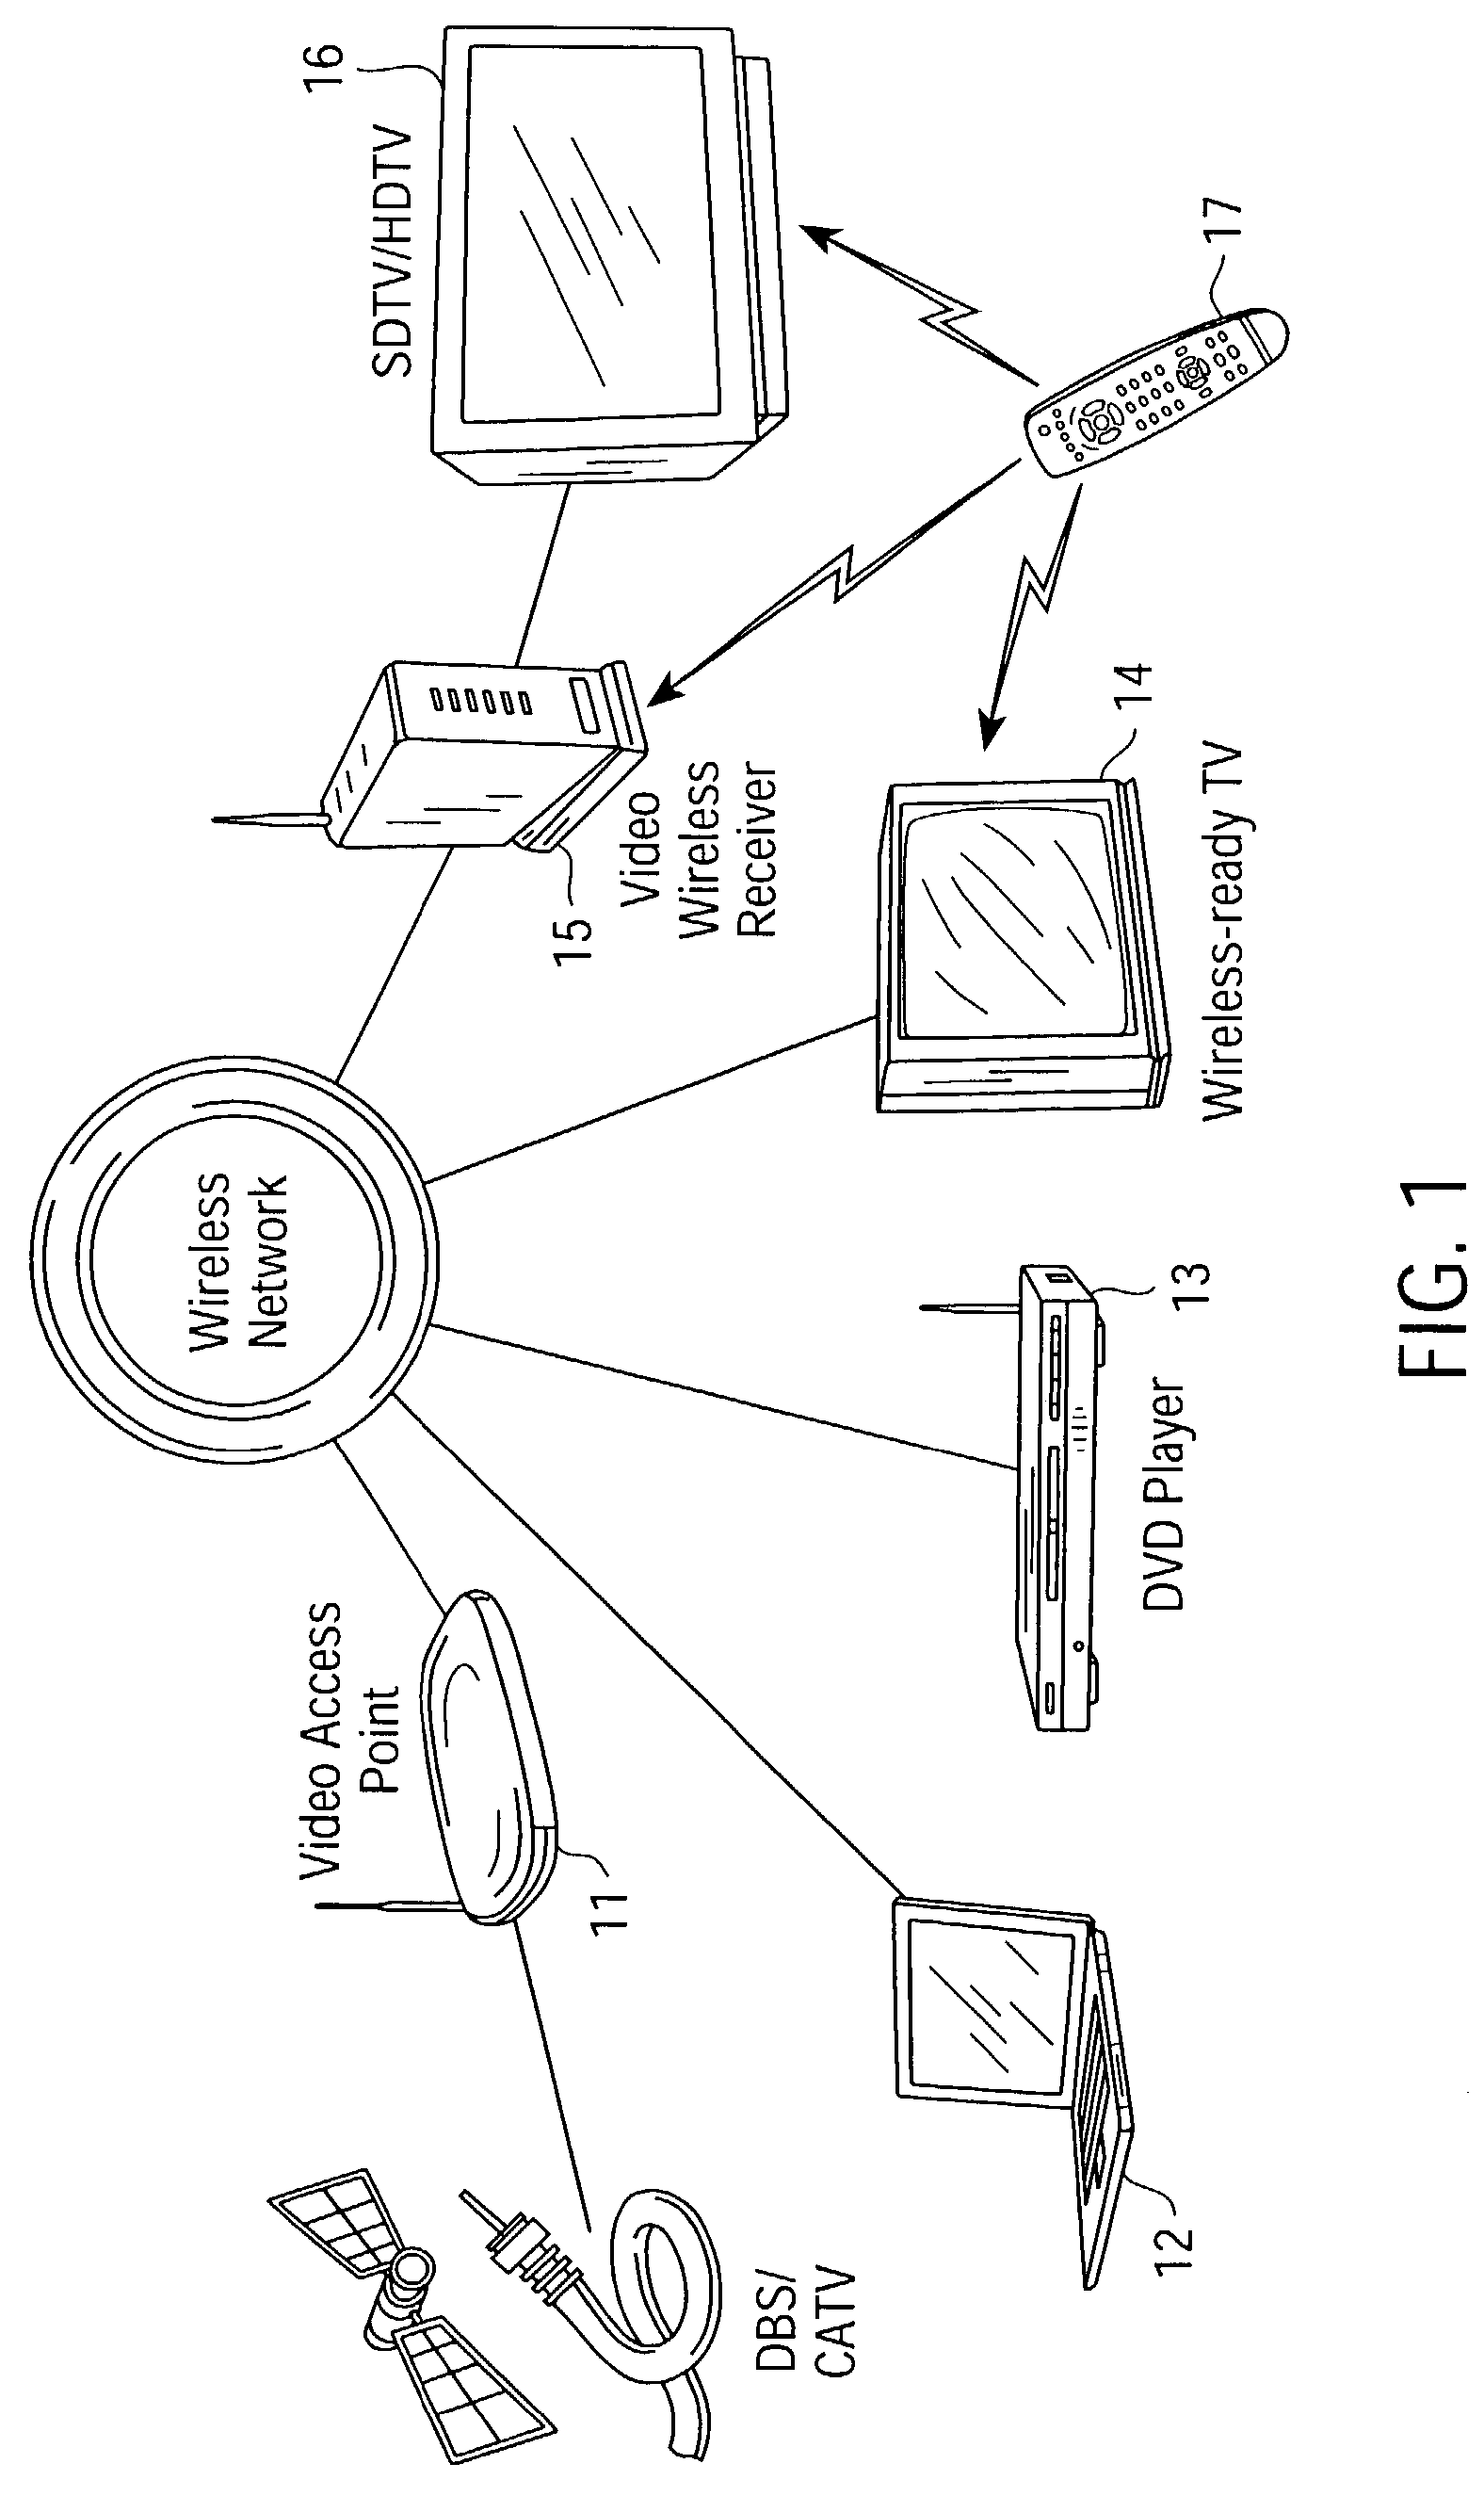 Single transceiver architecture for a wireless network